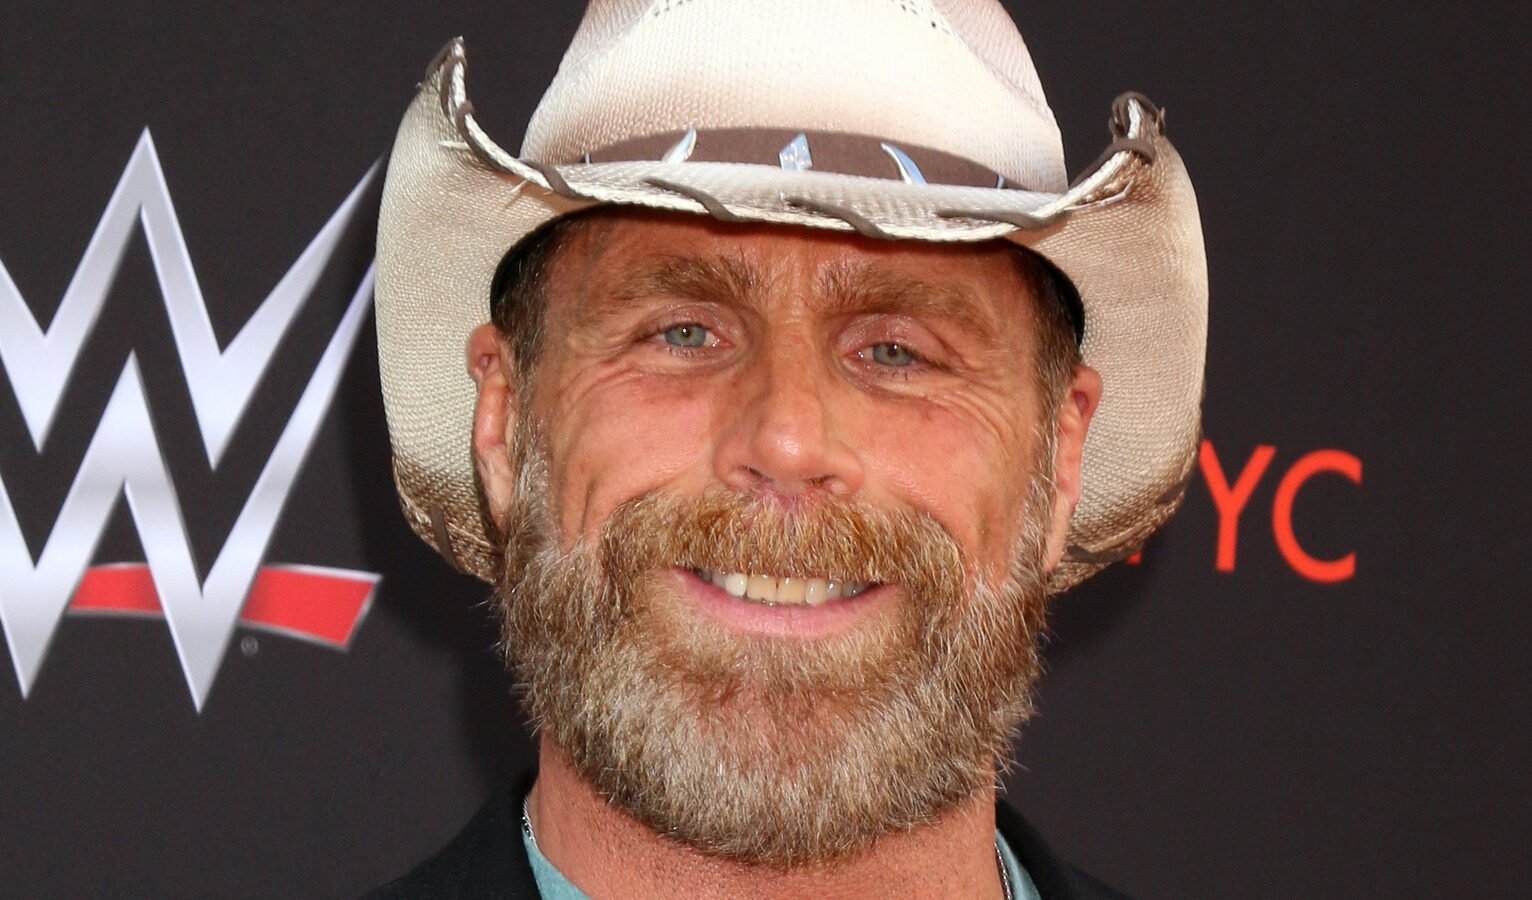 Shawn Michaels Extends Open Invitation to CM Punk for WWE NXT